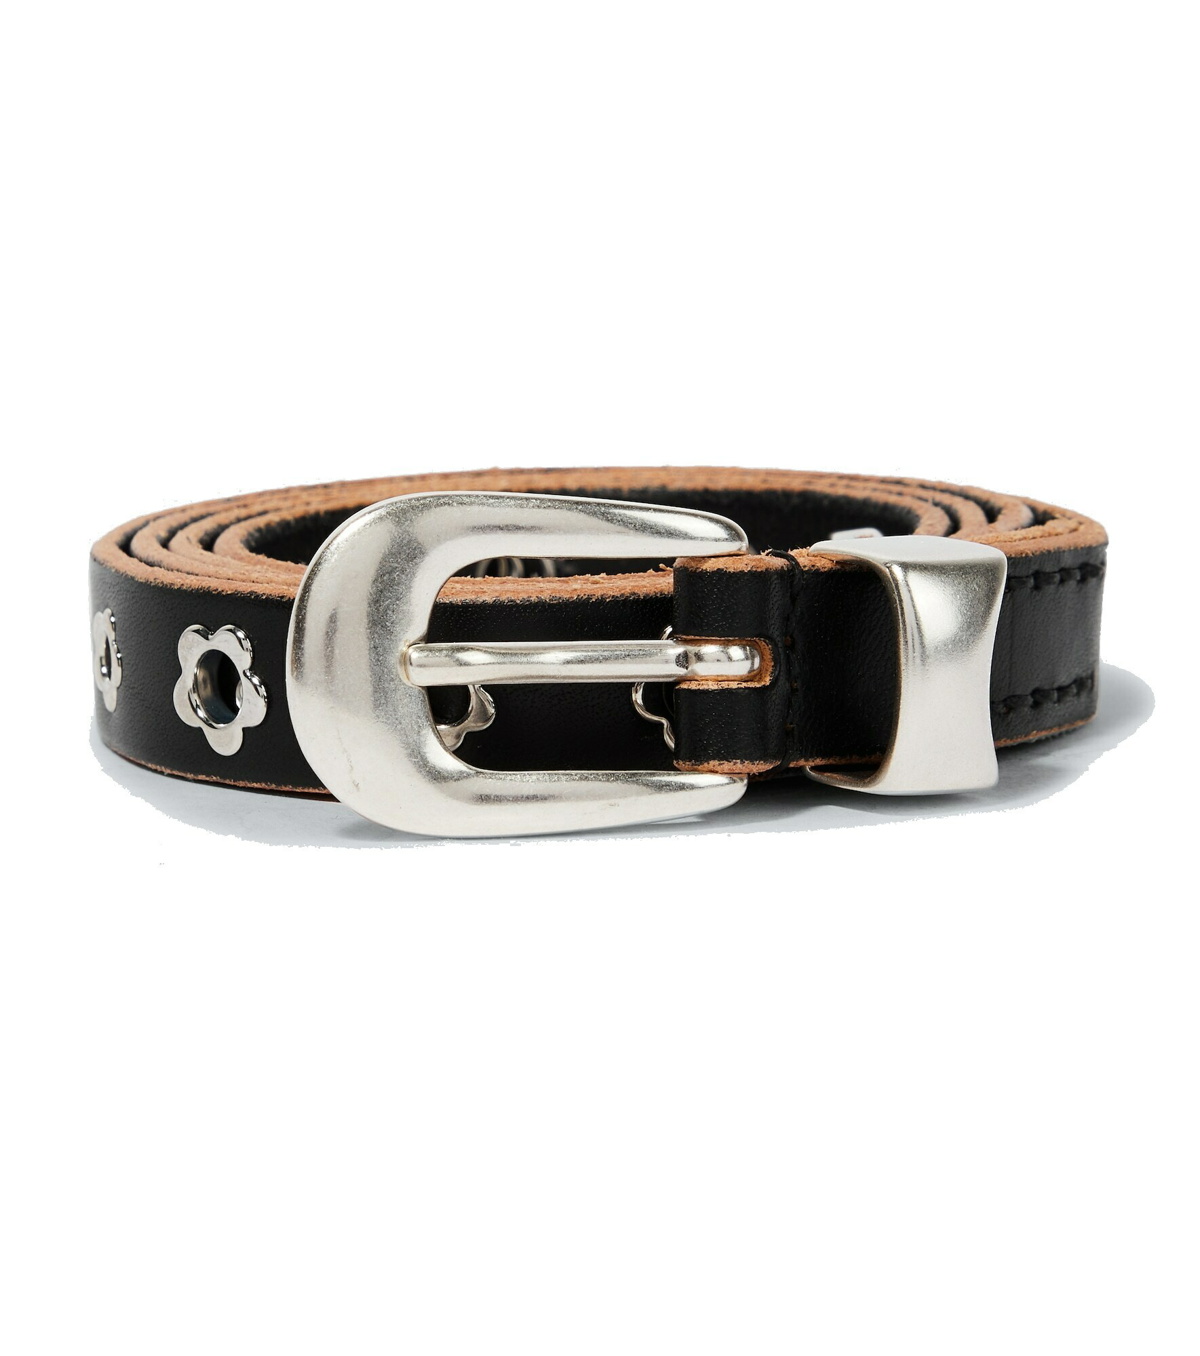 Our Legacy - Flowers leather belt Our Legacy